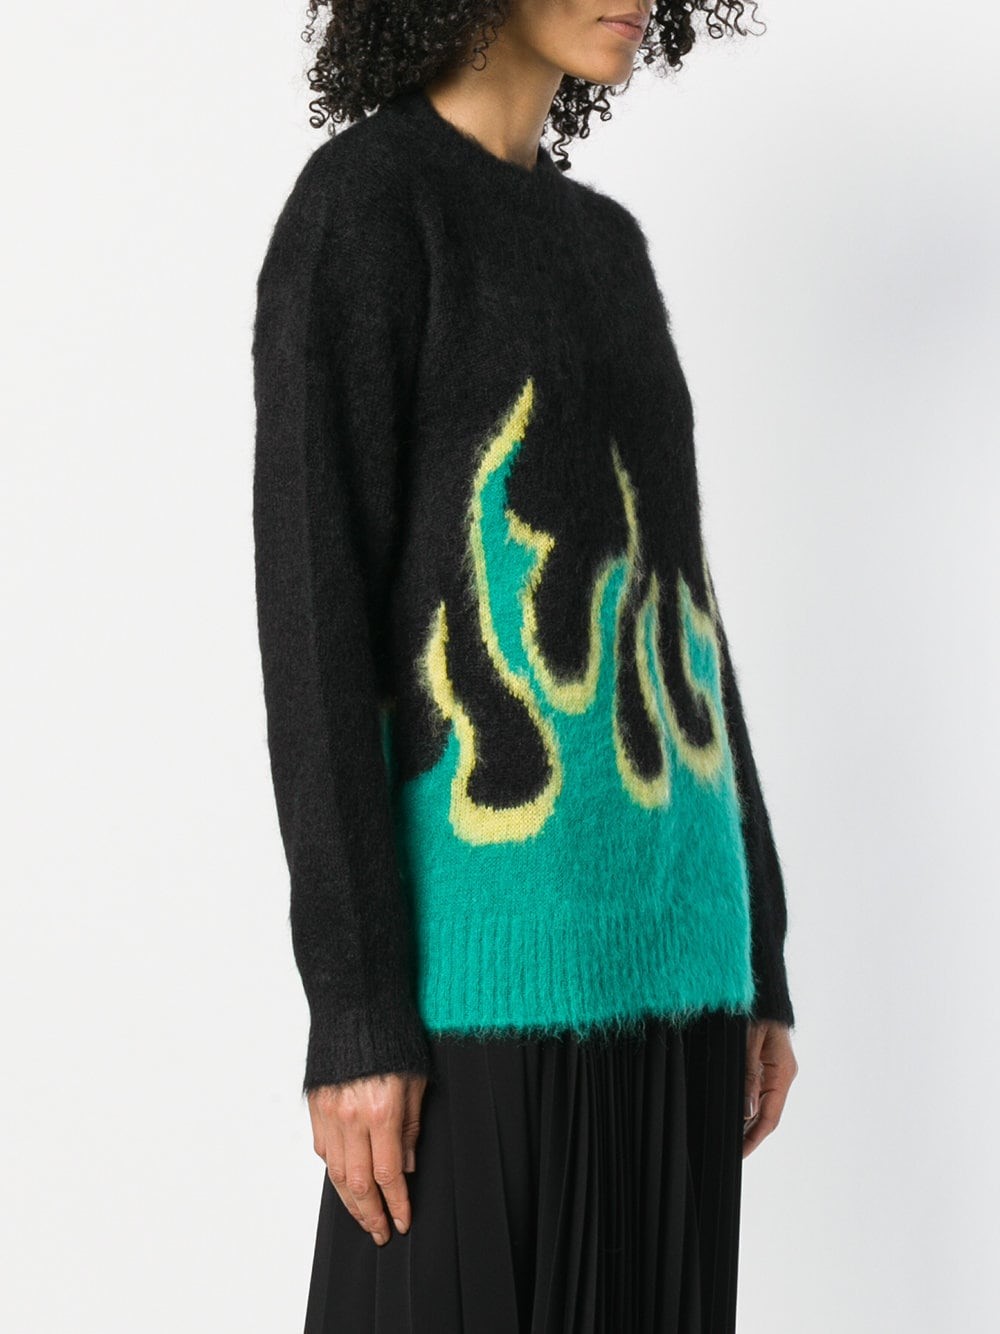 prada FLAME PRINT JUMPER available on 